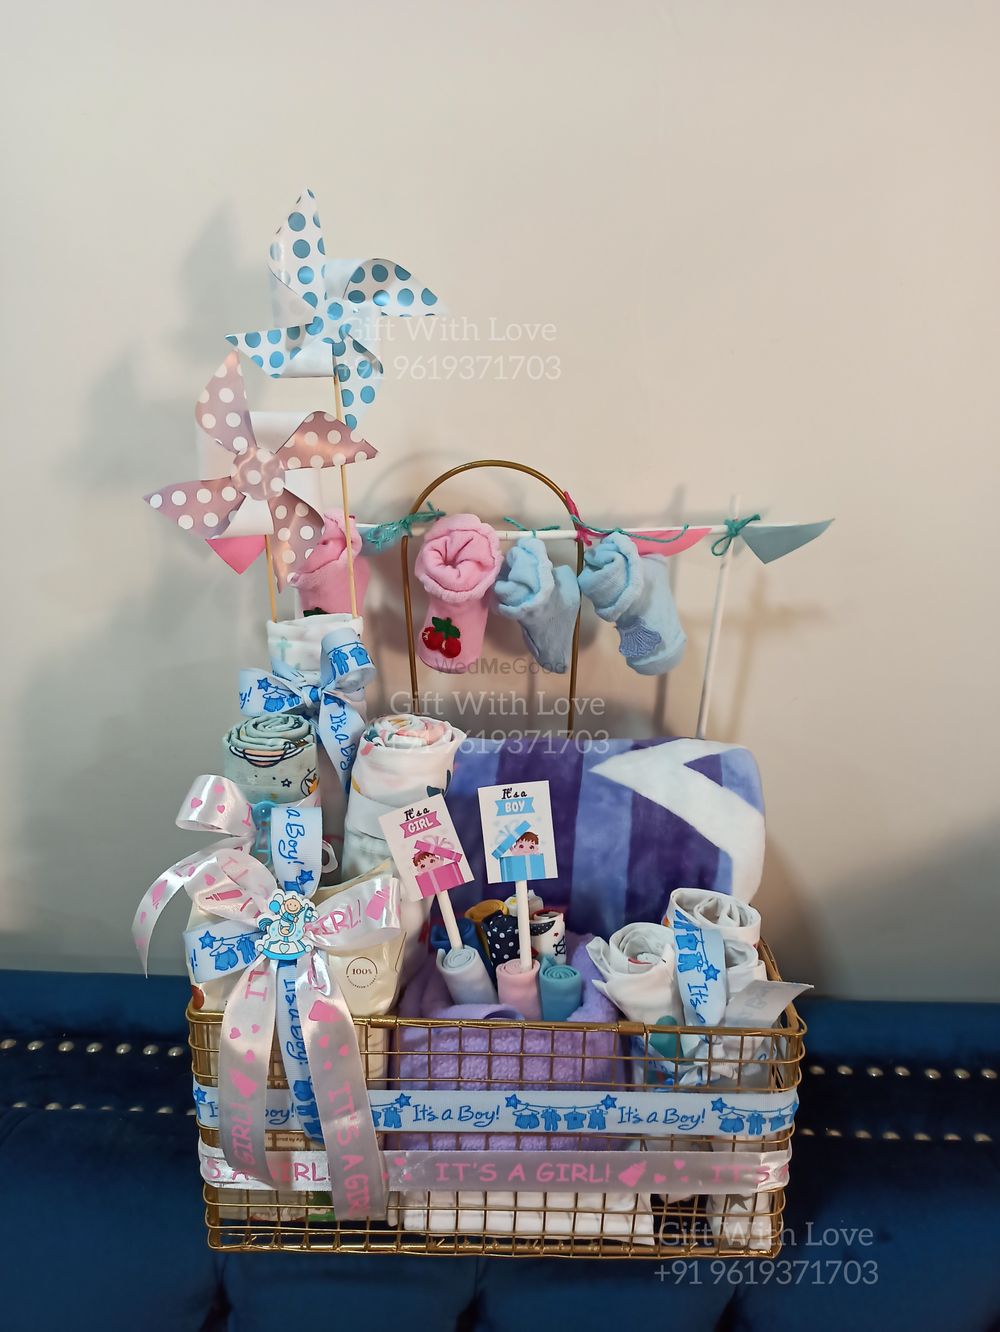 Photo From It's a Boy, It's a Girl, Baby Shower, Baby Announcement, Birthday - By Gift with Love